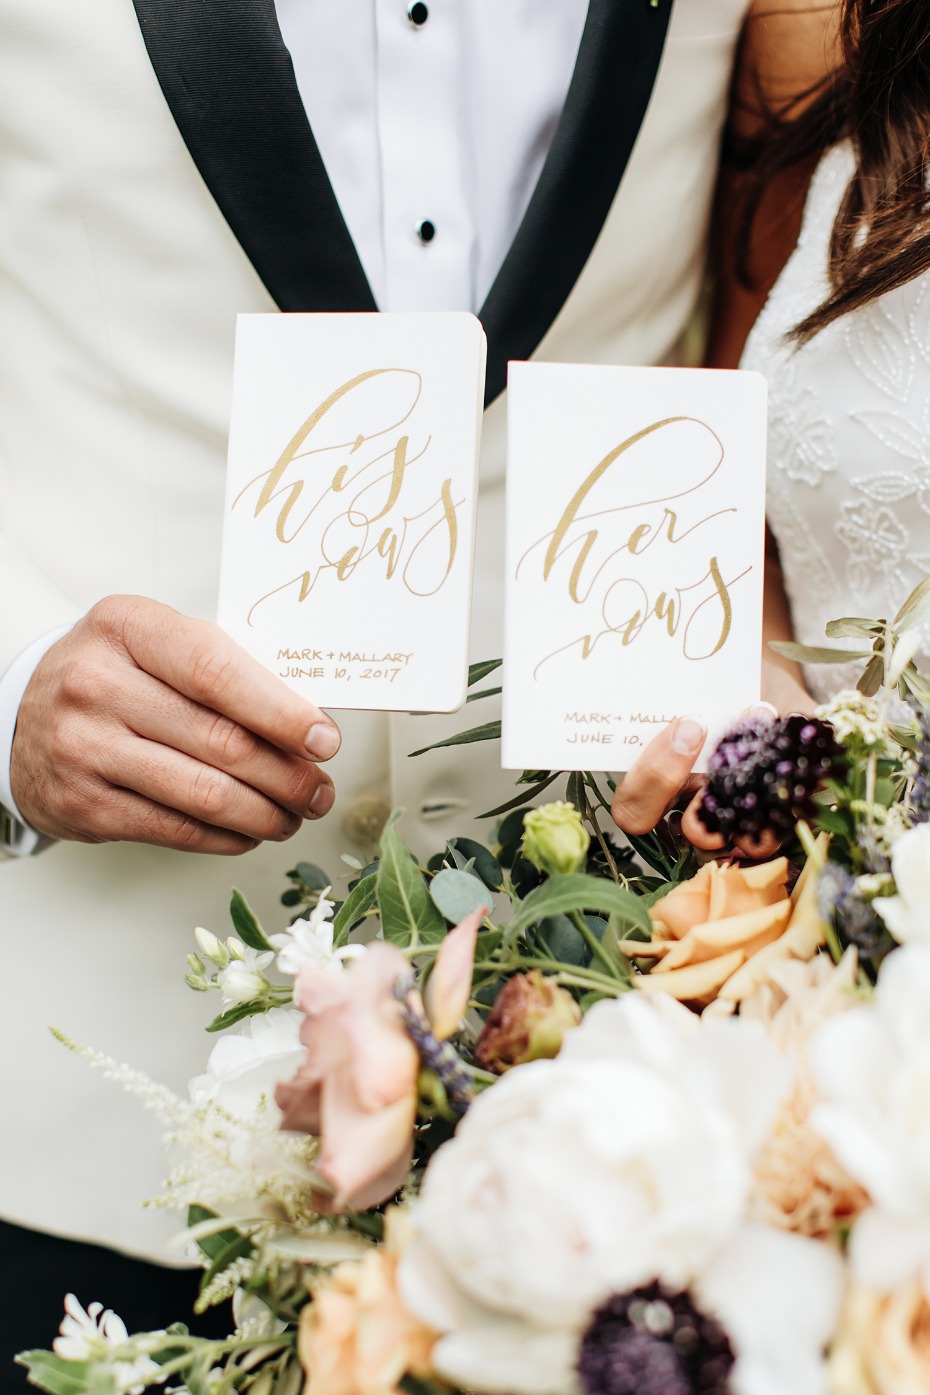 his and hers vow books for a private vow reading